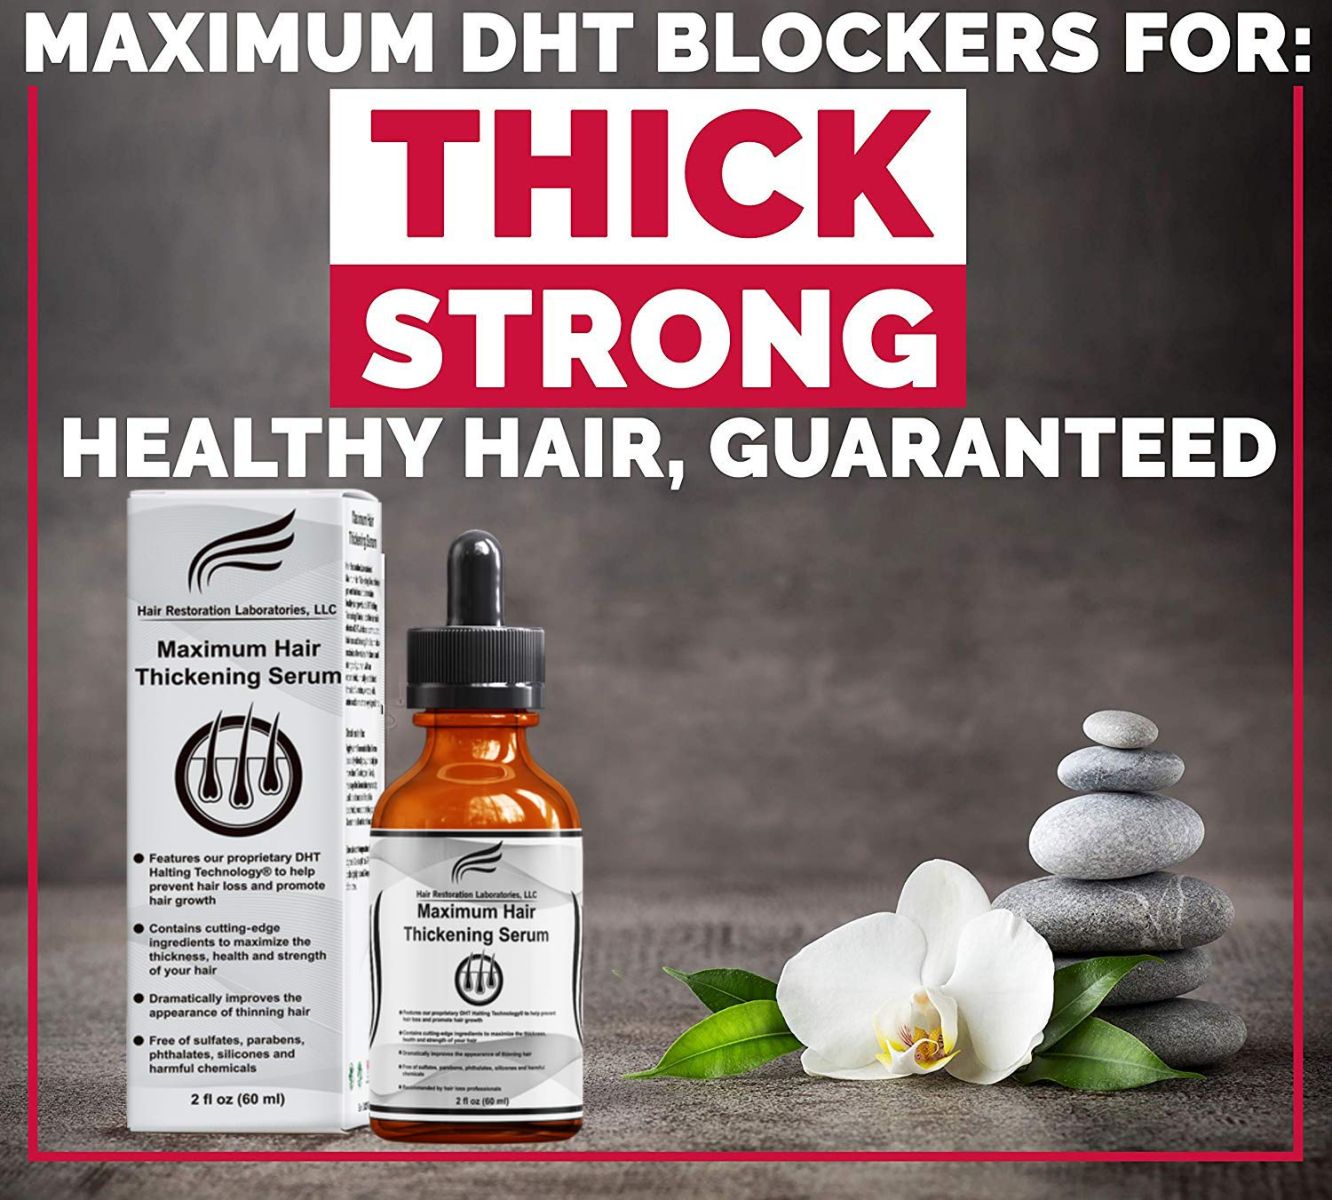 Hair Restoration Laboratories Maximum Hair Thickening Serum, Contains Powerful DHT Blocking Ingredients to Prevent Hair Loss with Instant Results, Hair Regrowth Treatment for Men and Women, 2 fl oz